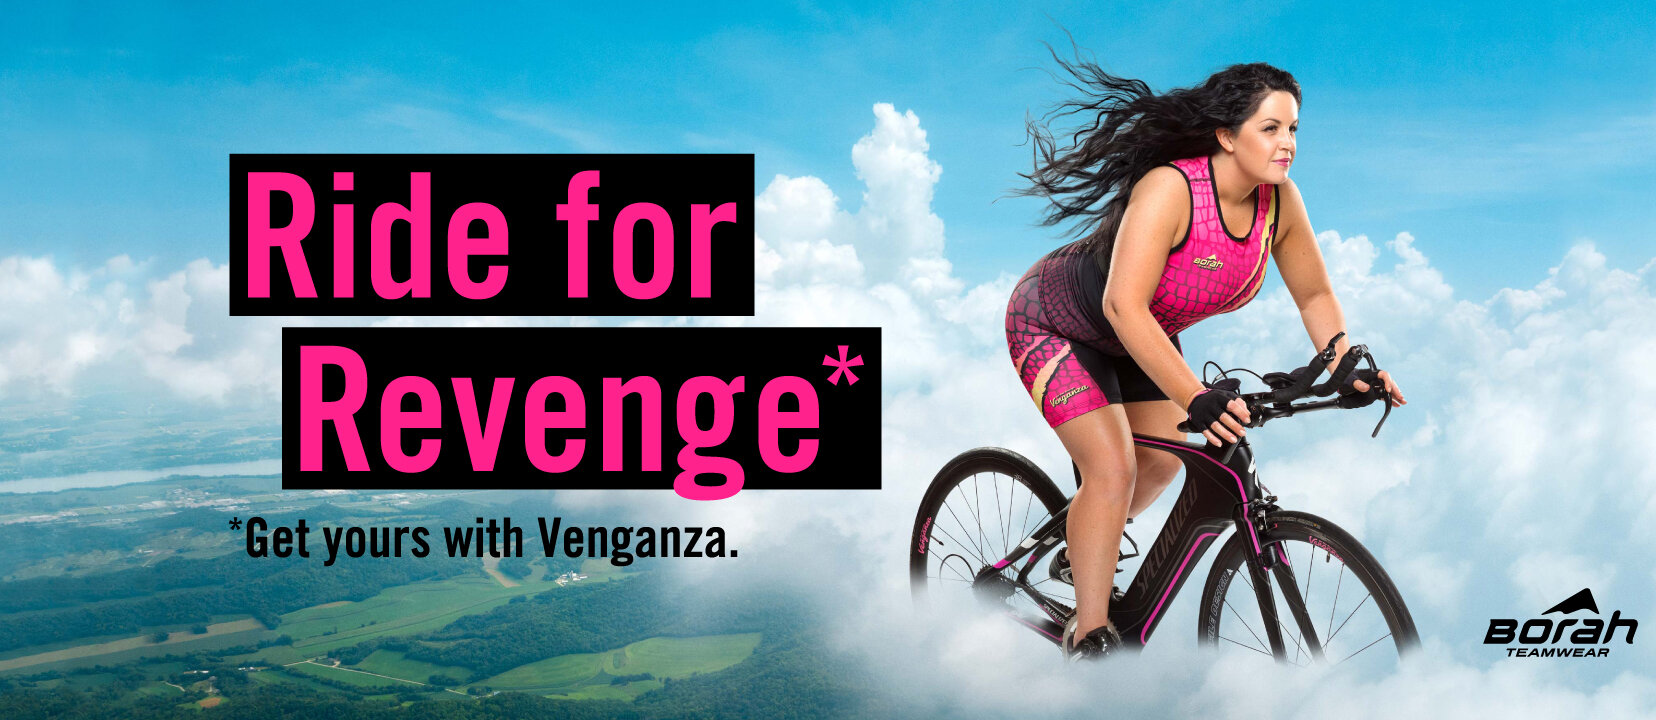 Creative product photography: Athlete wearing colorful triathlon kit by Venganza rides her bike through the sky.